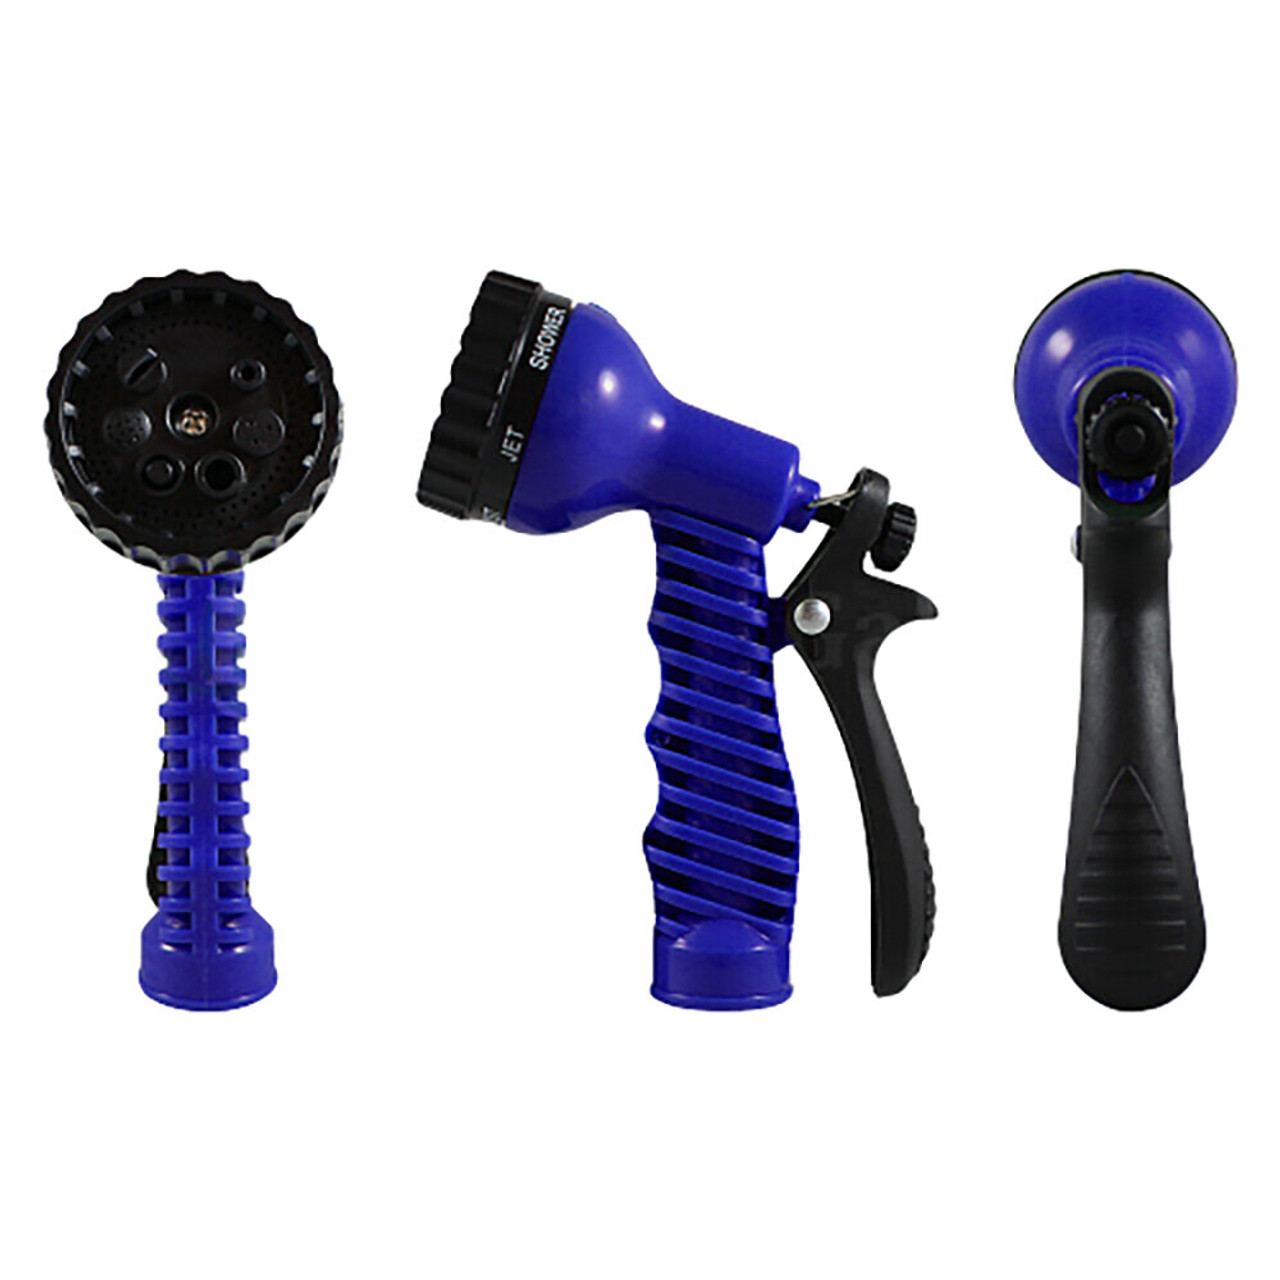 Adjustable Garden Hose Water Nozzle with 7-Spray Patterns product image